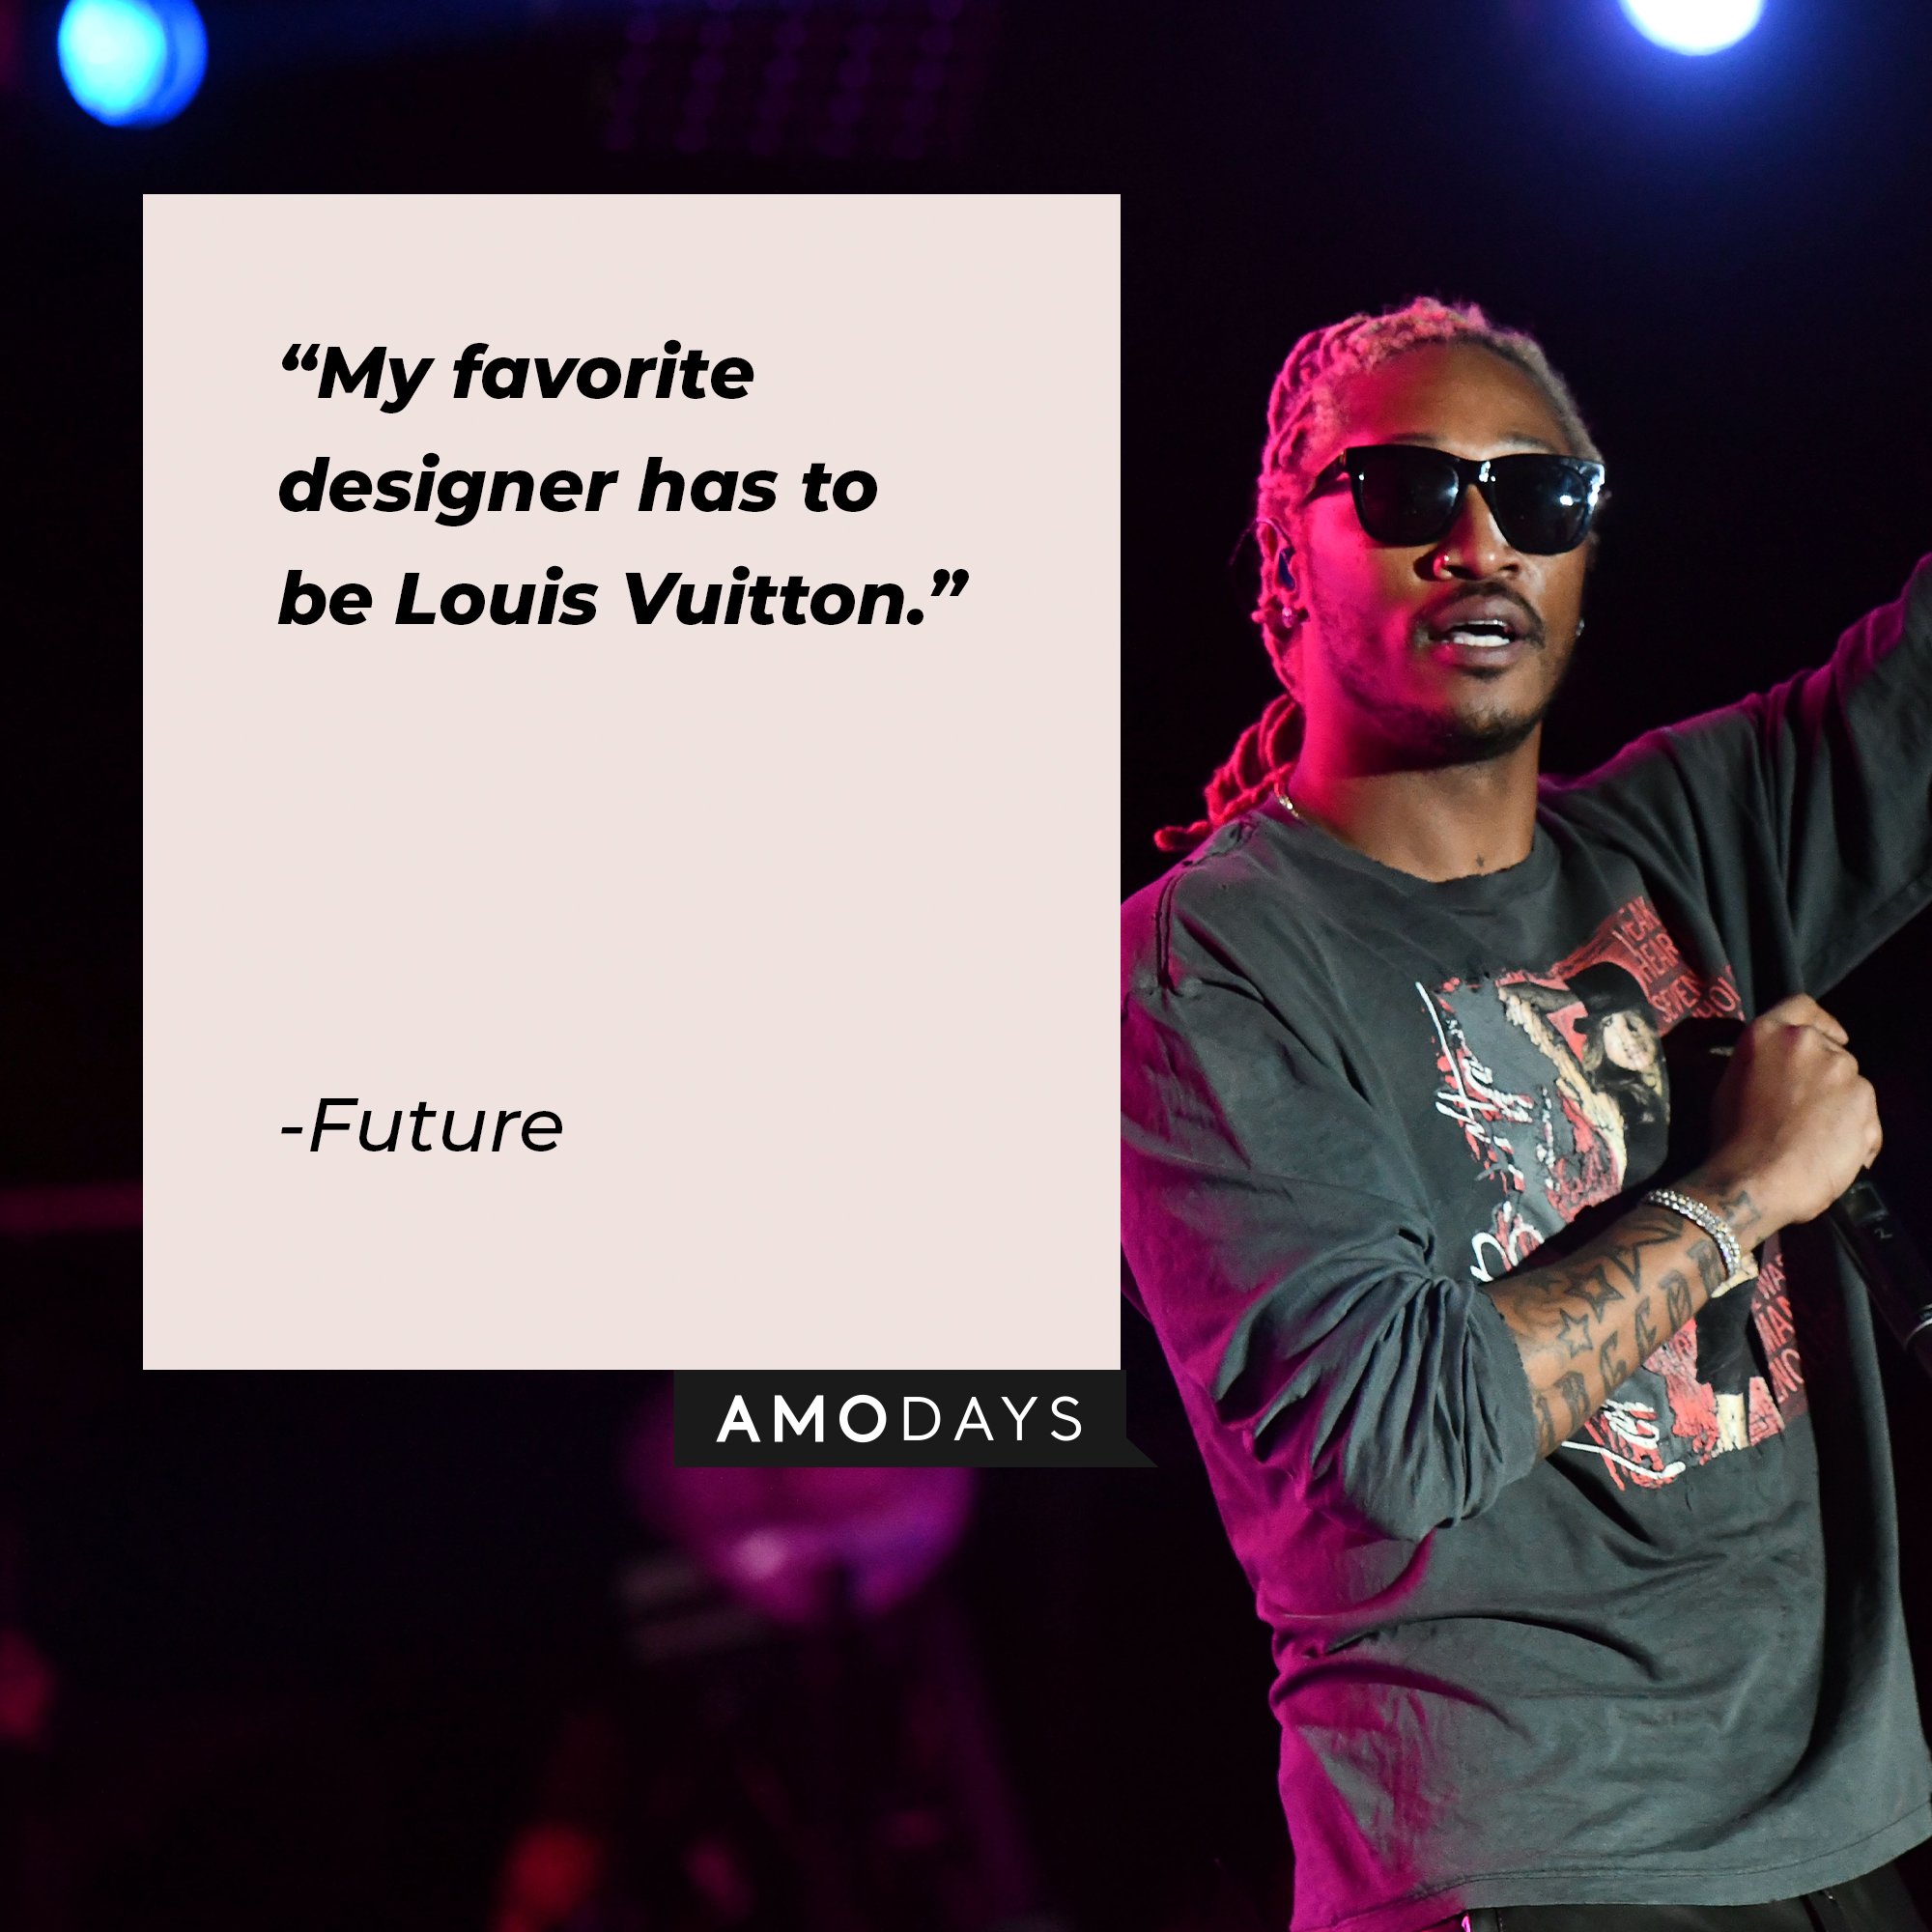 Future’s quote: "My favorite designer has to be Louis Vuitton." | Image: AmoDays 